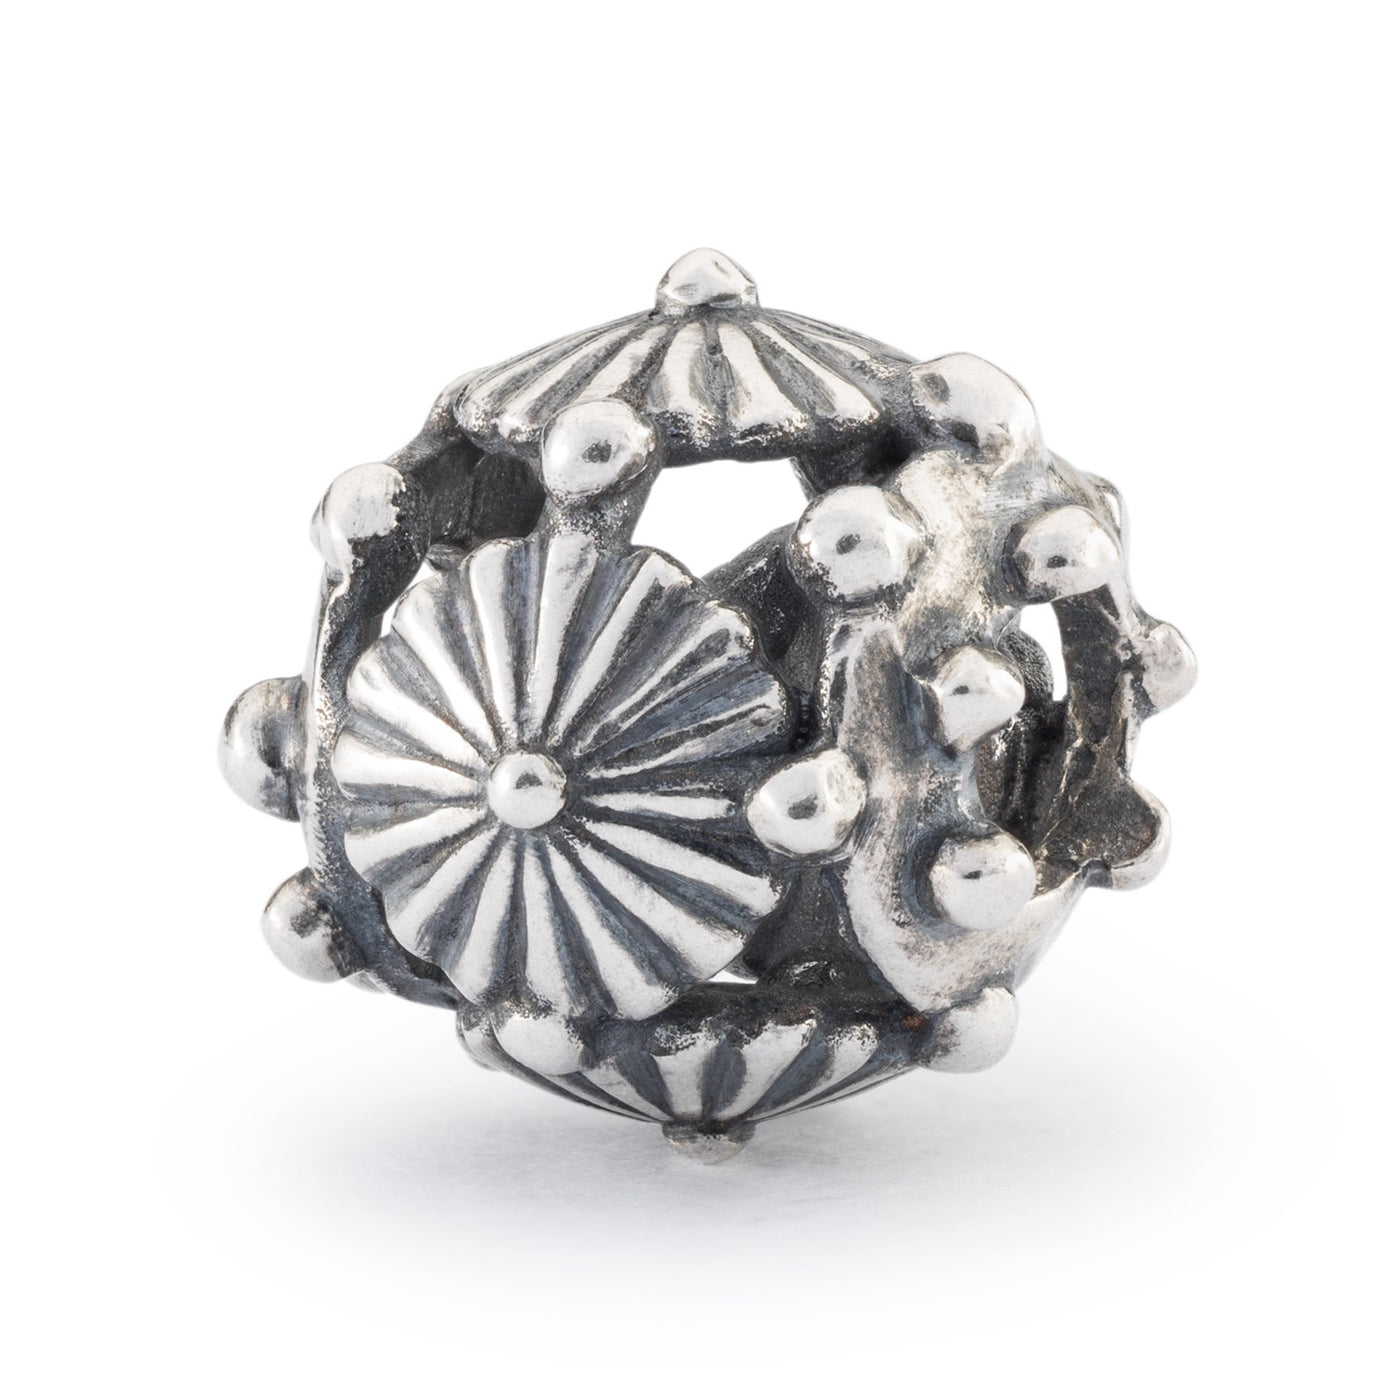 A whimsical bead featuring a daisy flower design in sterling silver, adds a playful and cheerful touch to your bracelet.